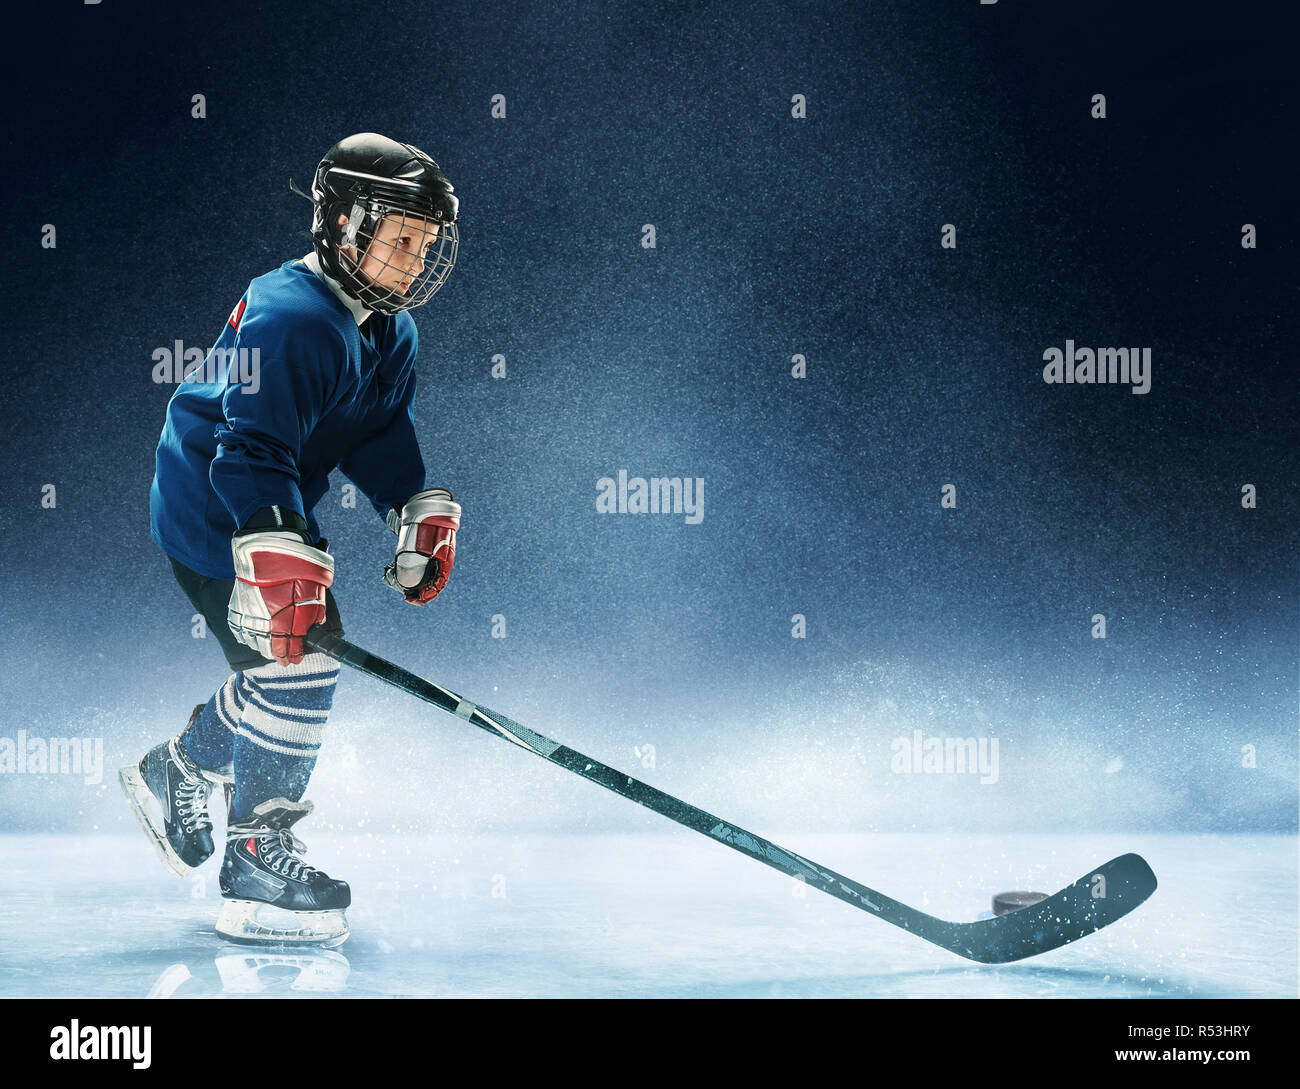 Little boy playing ice hockey at arena. A hockey player in uniform with equipment over a blue background. The athlete, child, sport, action concept Stock Photo